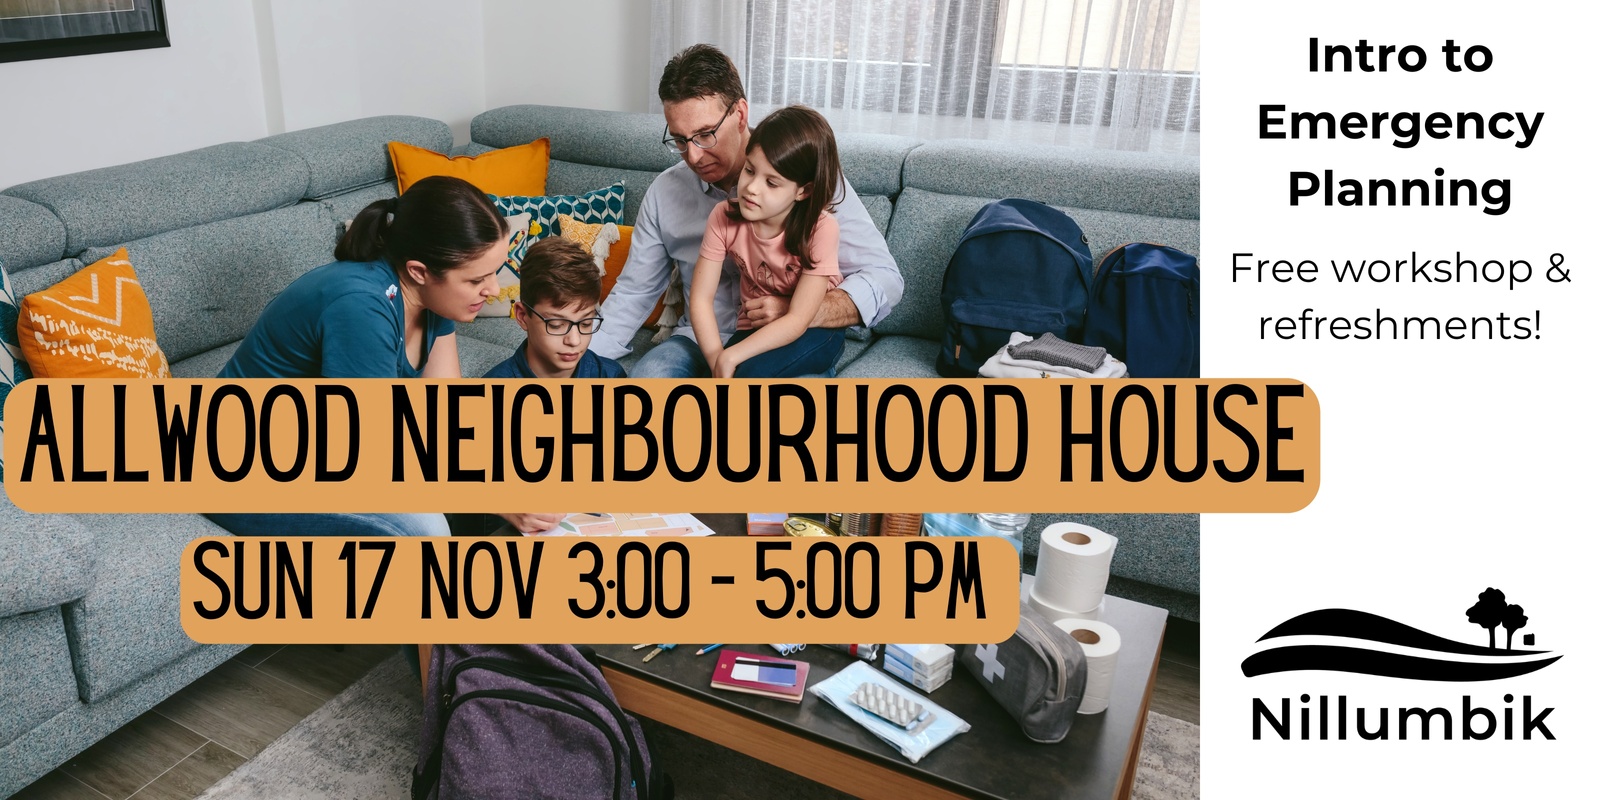 Banner image for Intro to Emergency Planning Workshop - Allwood Neighbourhood House